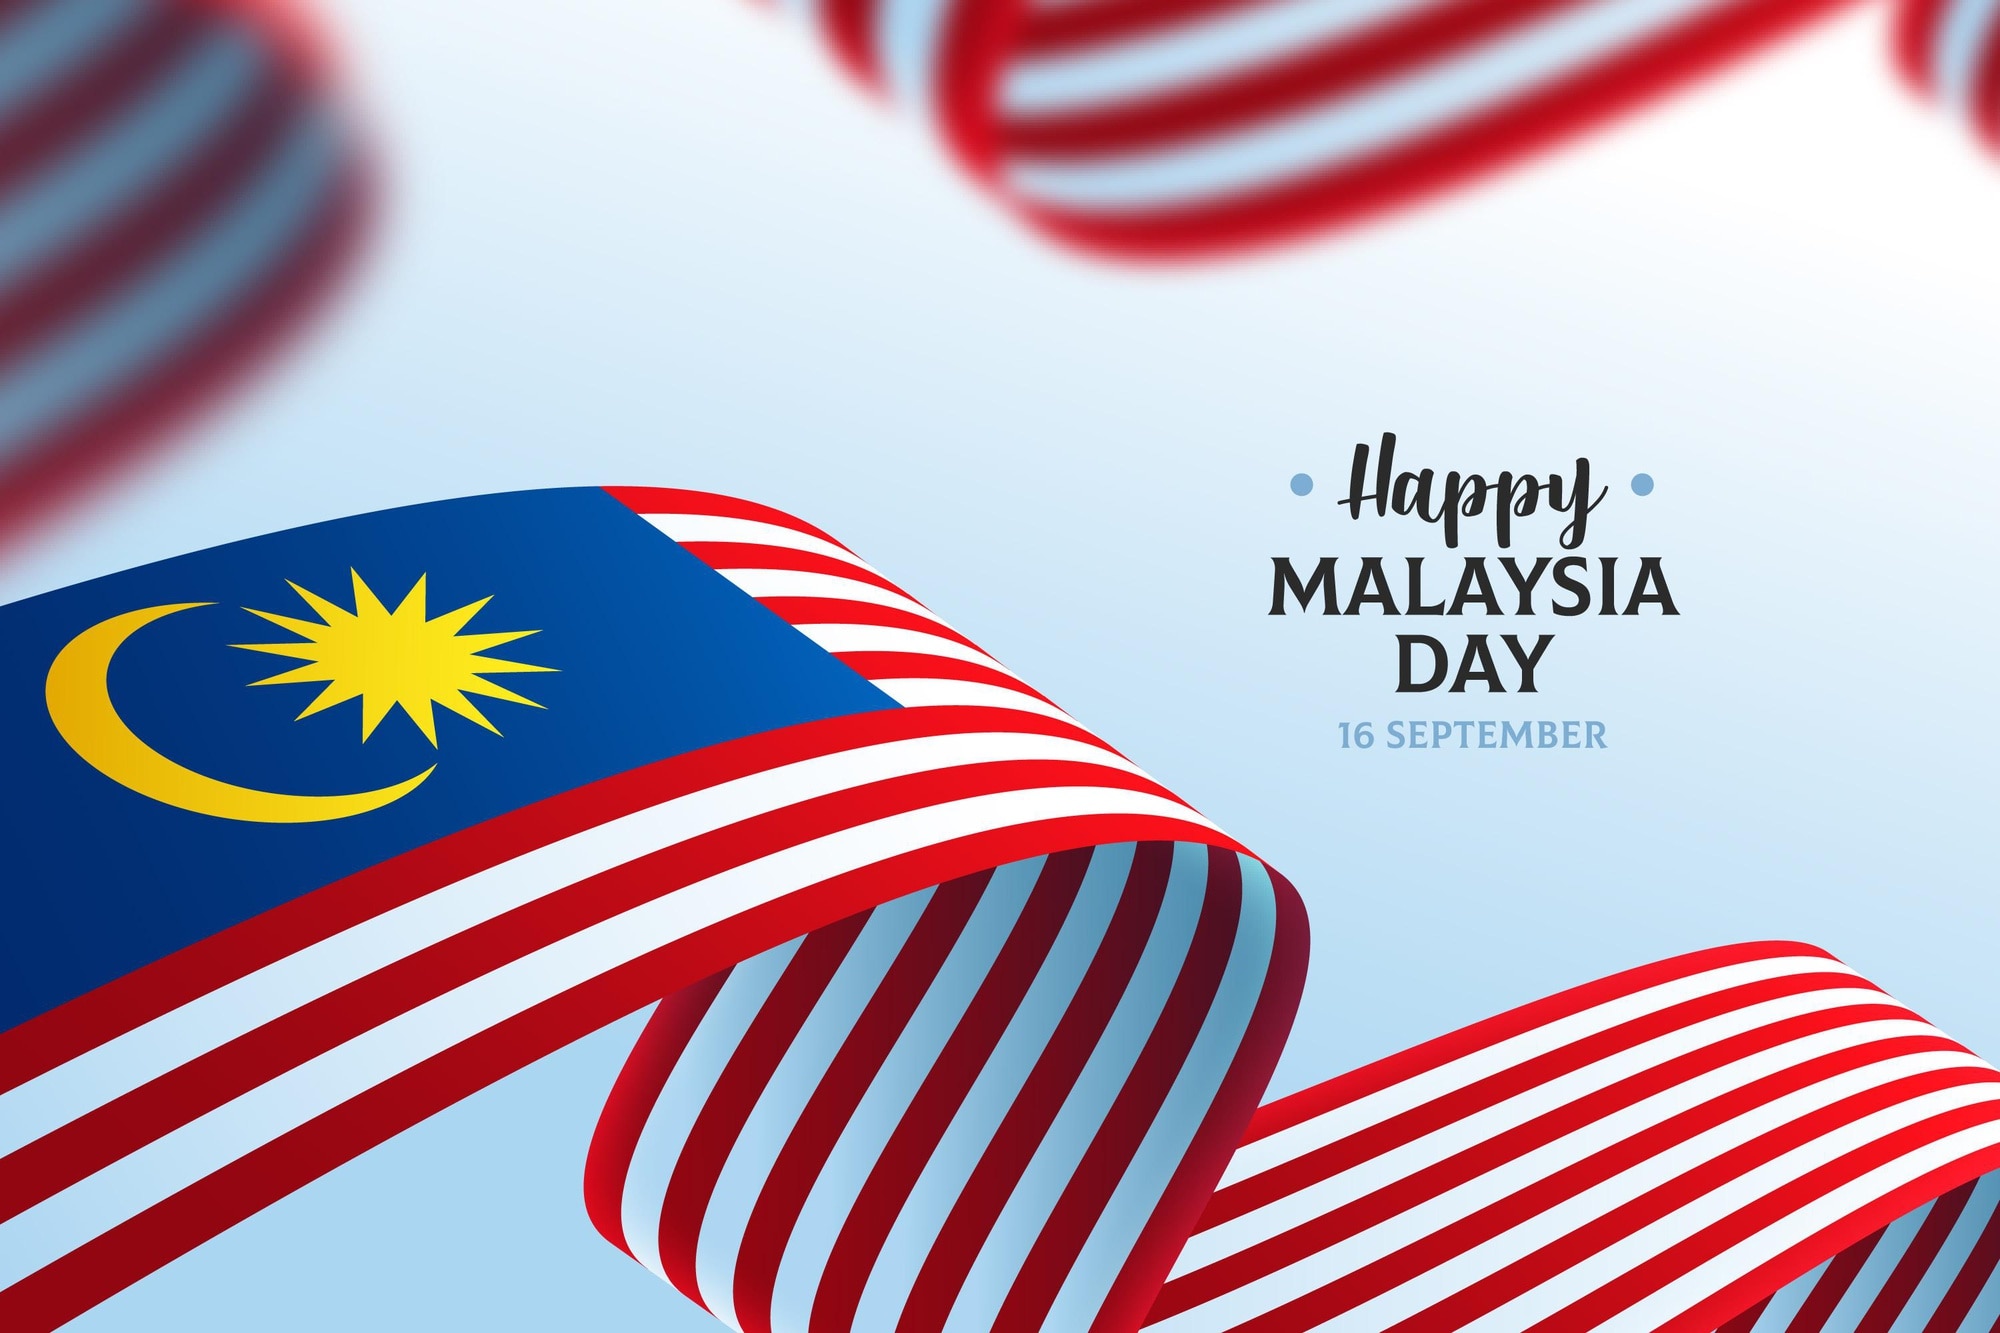 Happy Malaysia Day 2022: Malay Quotes, Wishes, Images, Messages, Greetings, and Instagram Captions